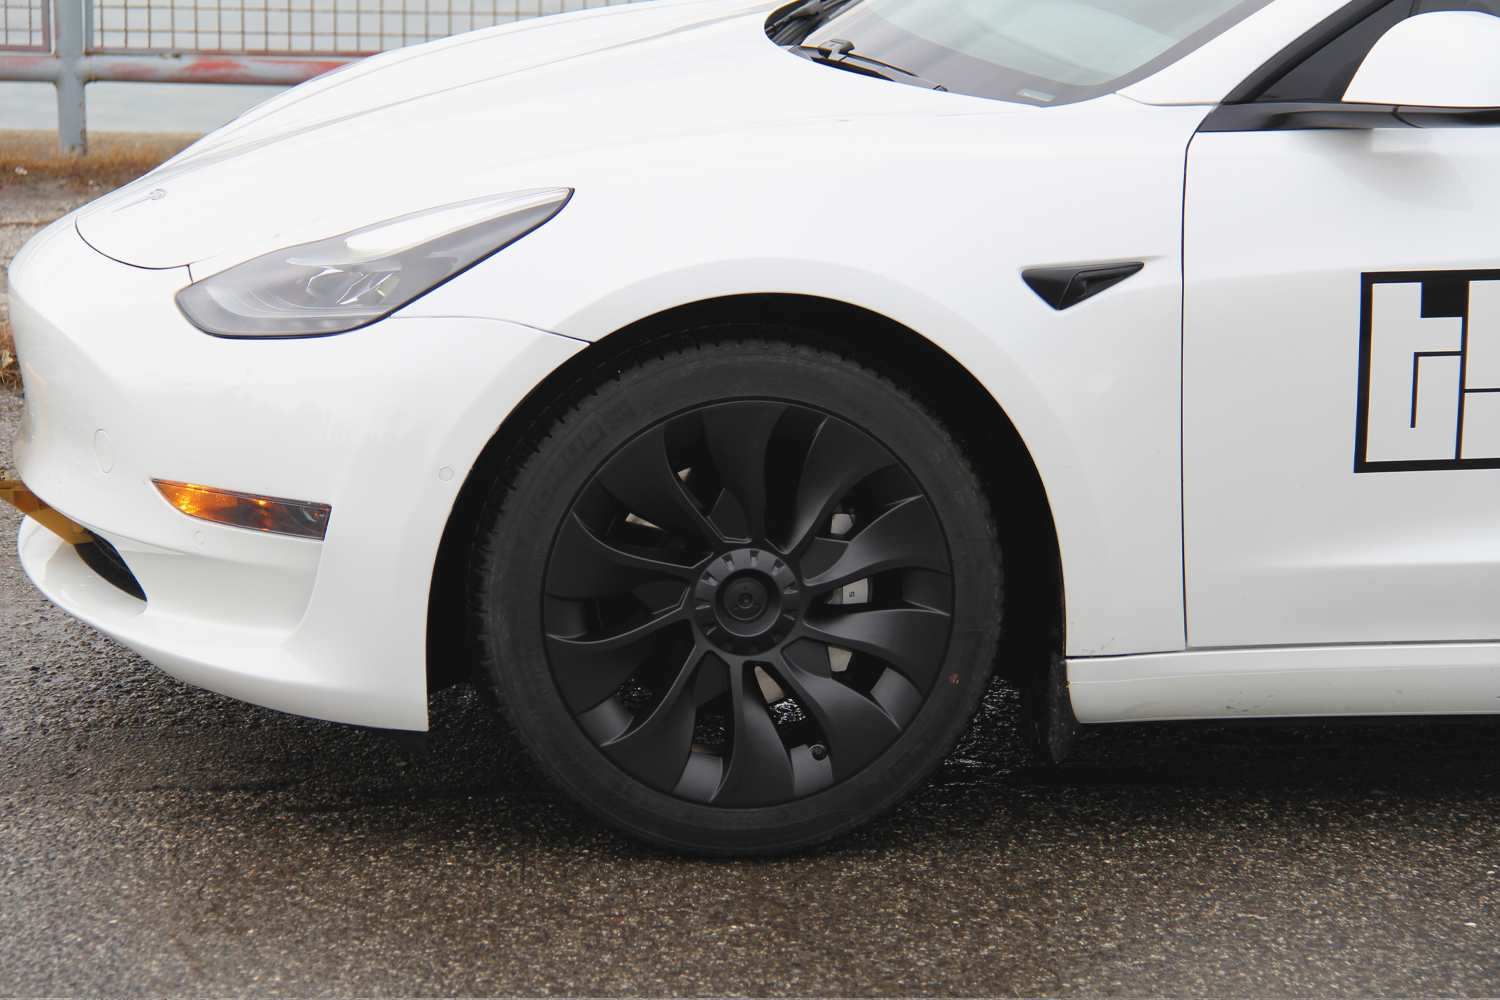 Model 3 Wheel Covers - Induction - Tesloid USA